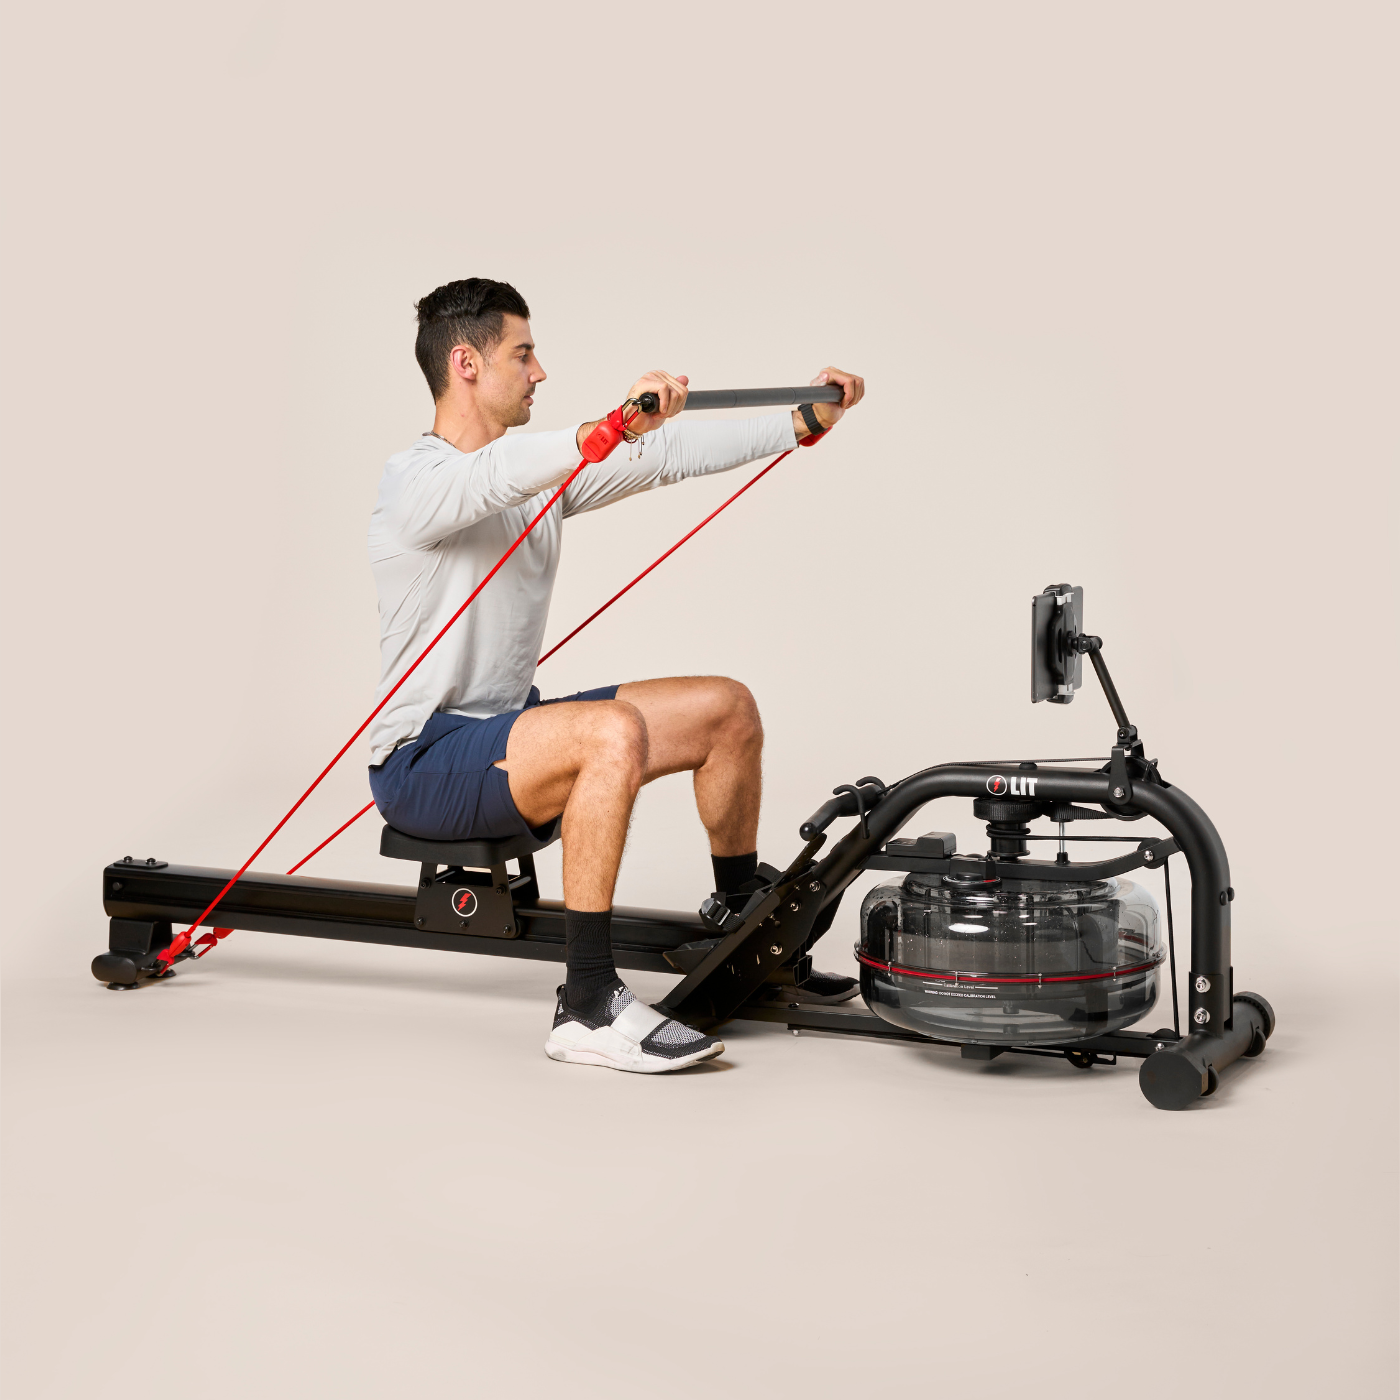 Best Fitness Deals for the New Year: Save Hundreds on Home Gym Equipment,  Accessories and More - CNET